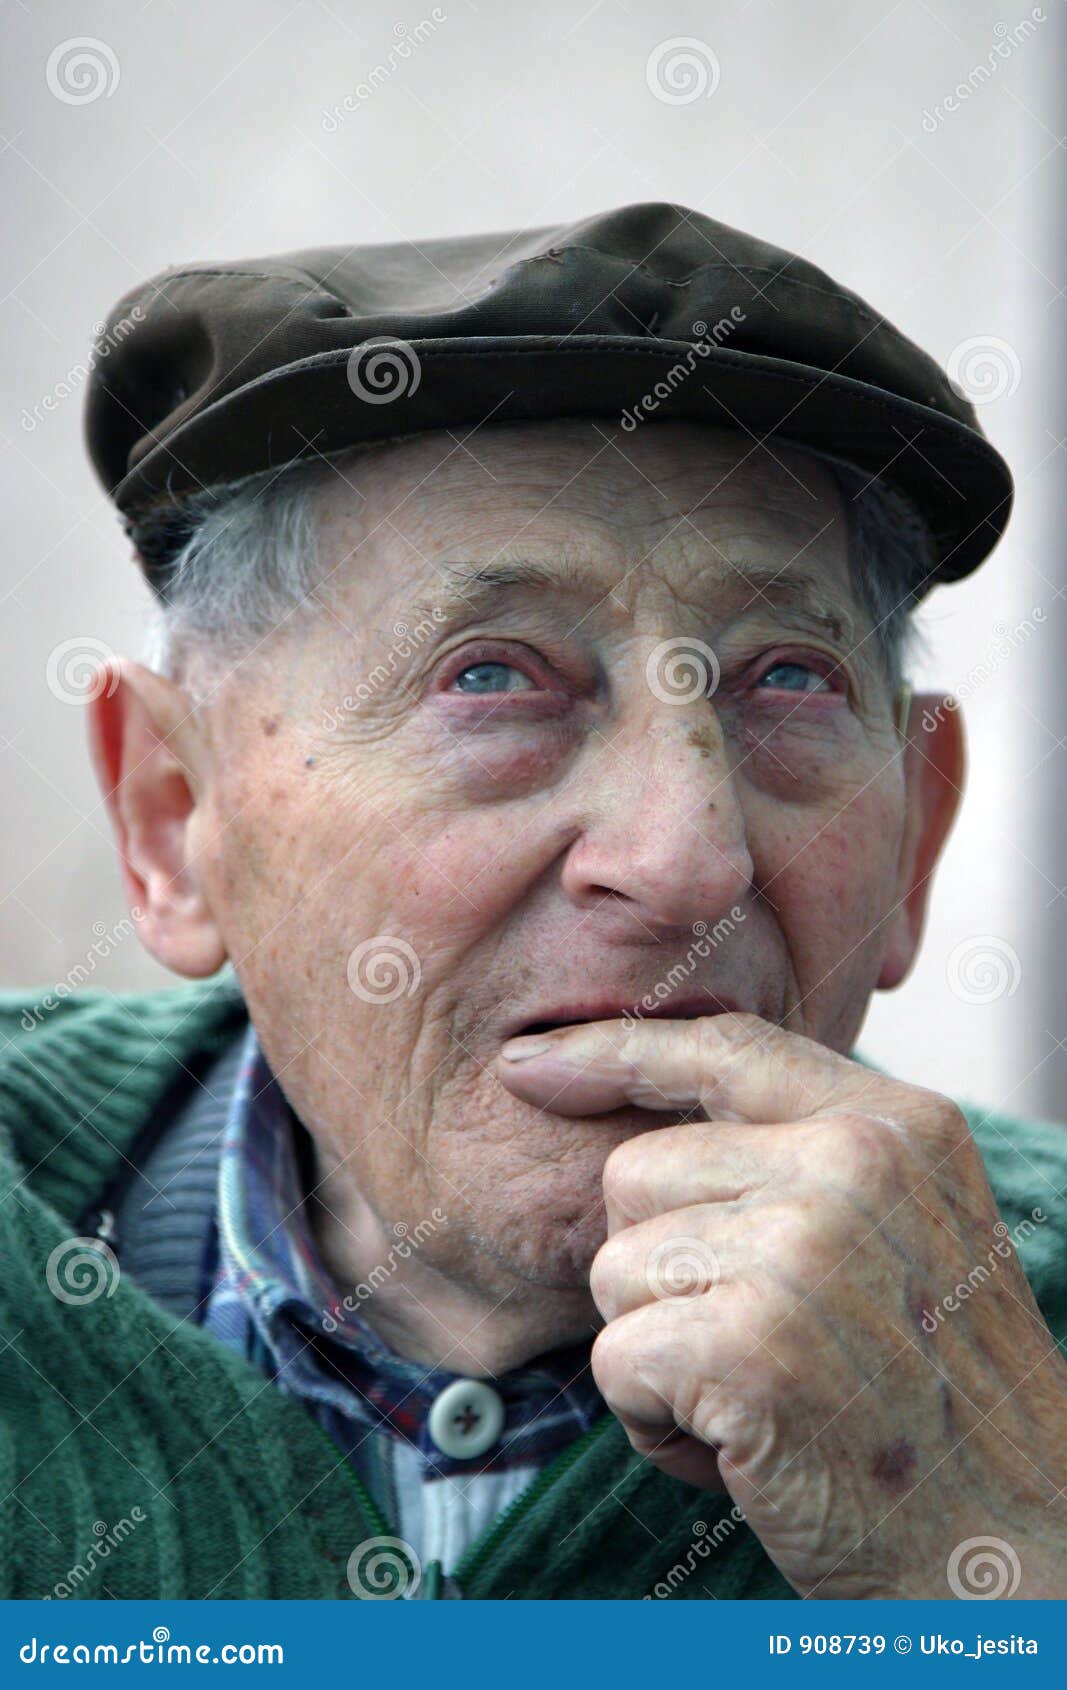 Contemplate old man stock image. Image of expressive, dramatic - 908739